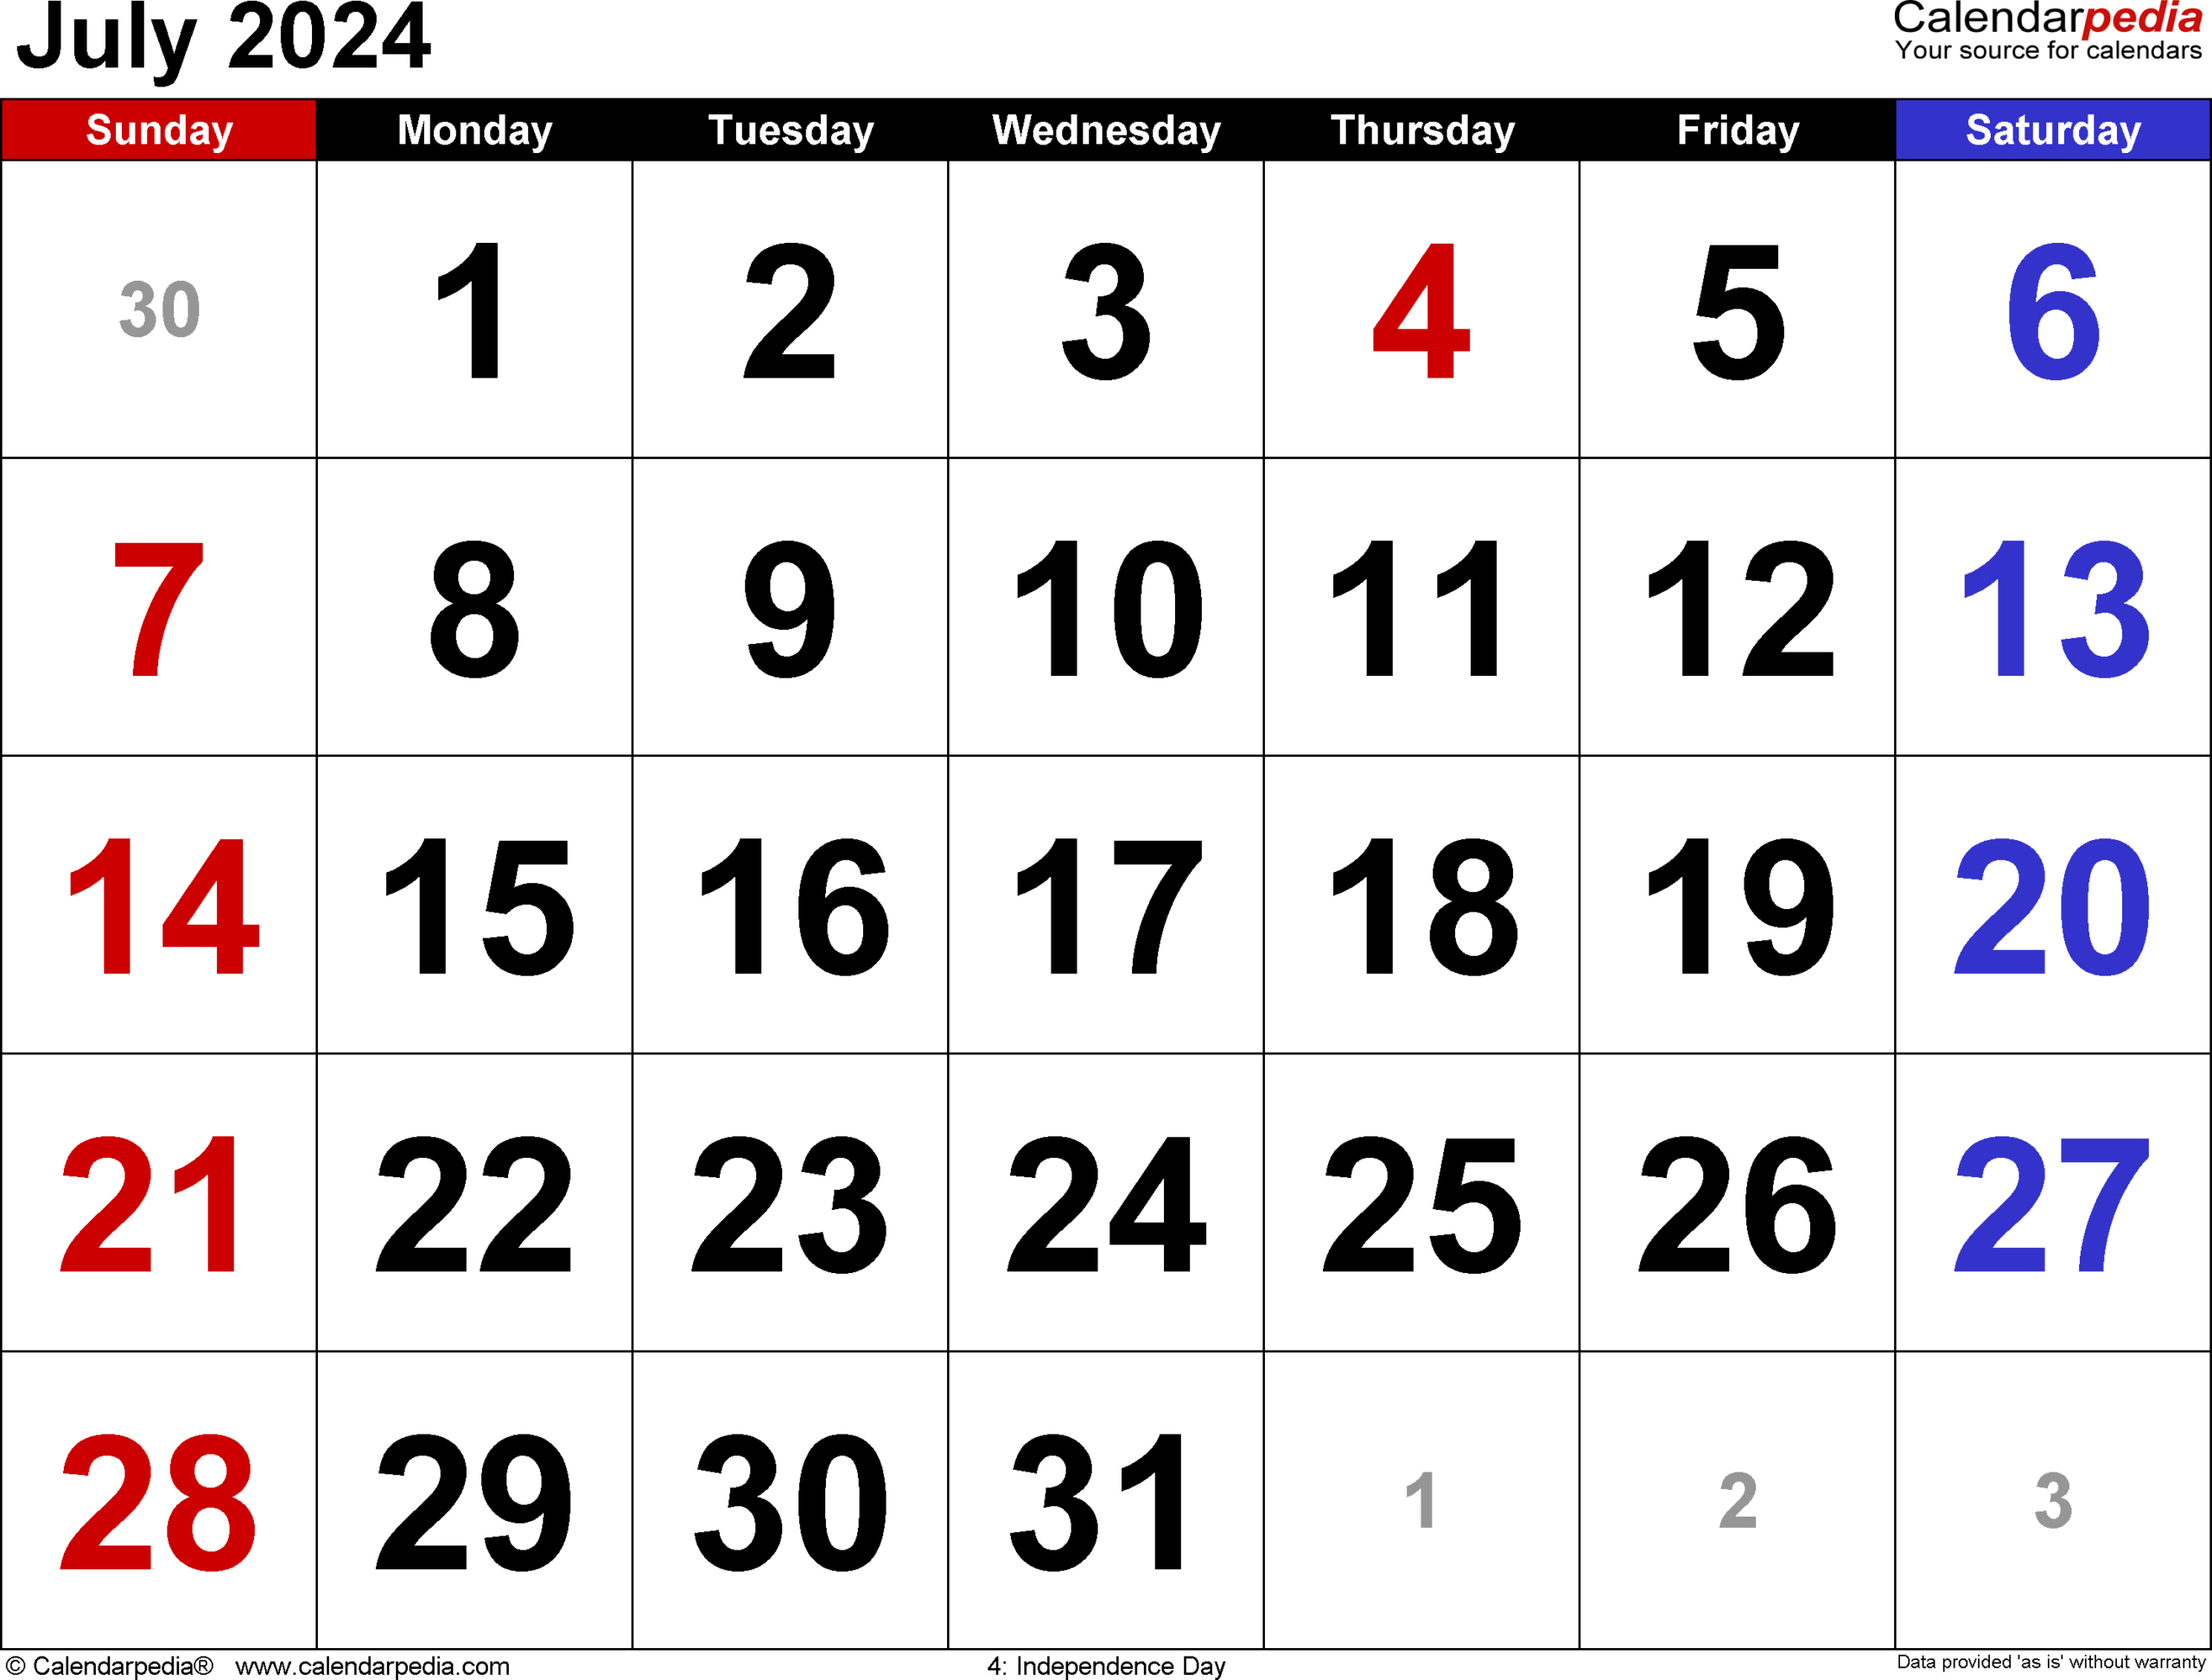 July 2024 Calendar | Templates For Word, Excel And Pdf inside 7 July 2024 Calendar Printable